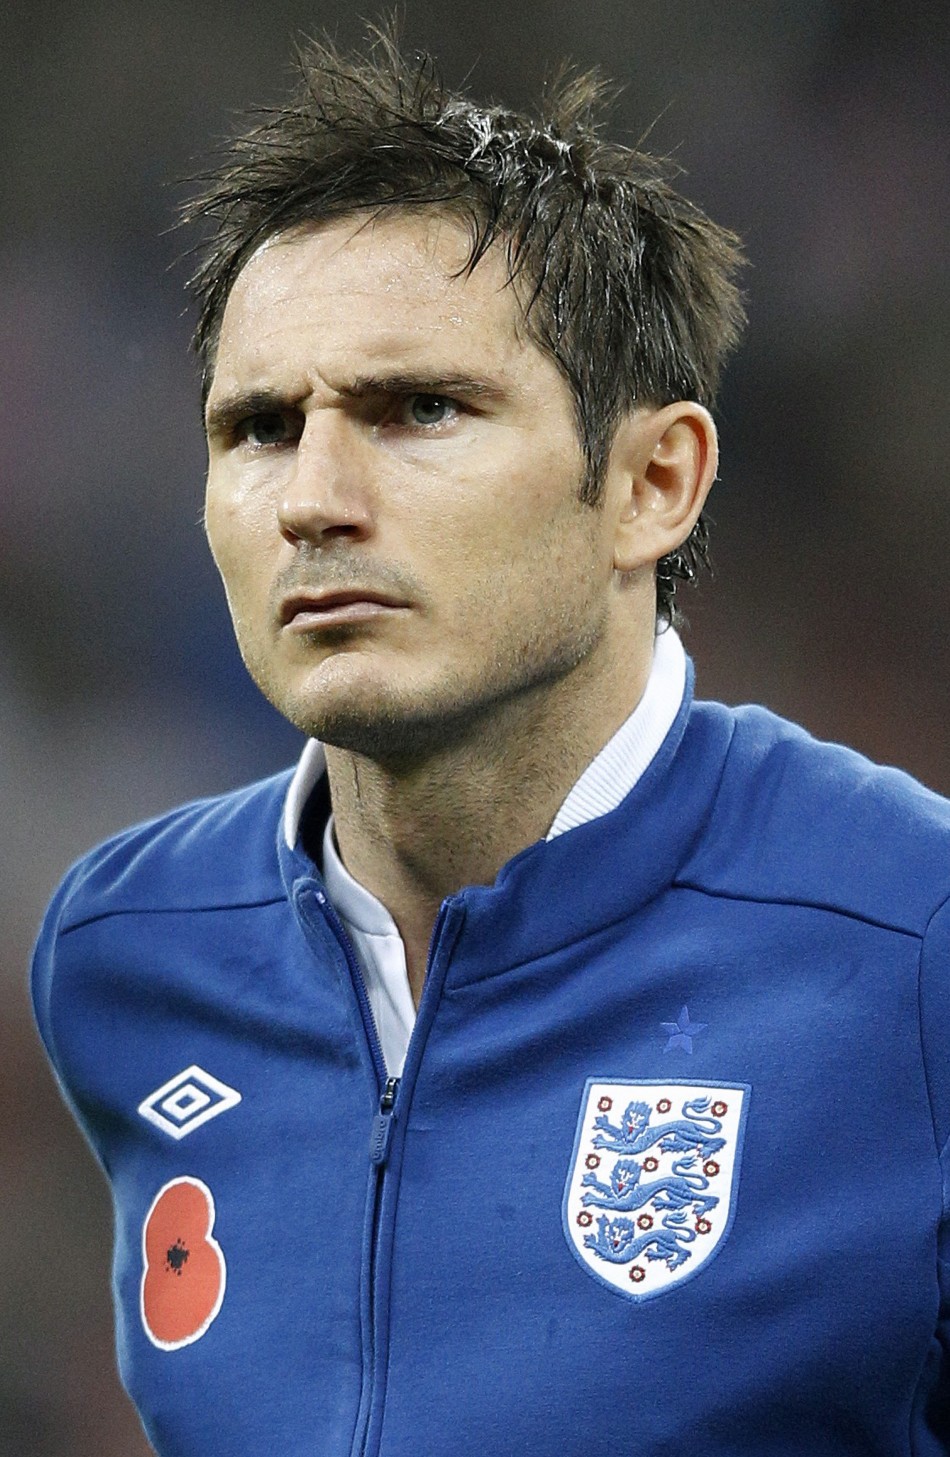 Englands Lampard lines up for the national anthems before their international friendly soccer match against Spain at Wembley Stadium in London